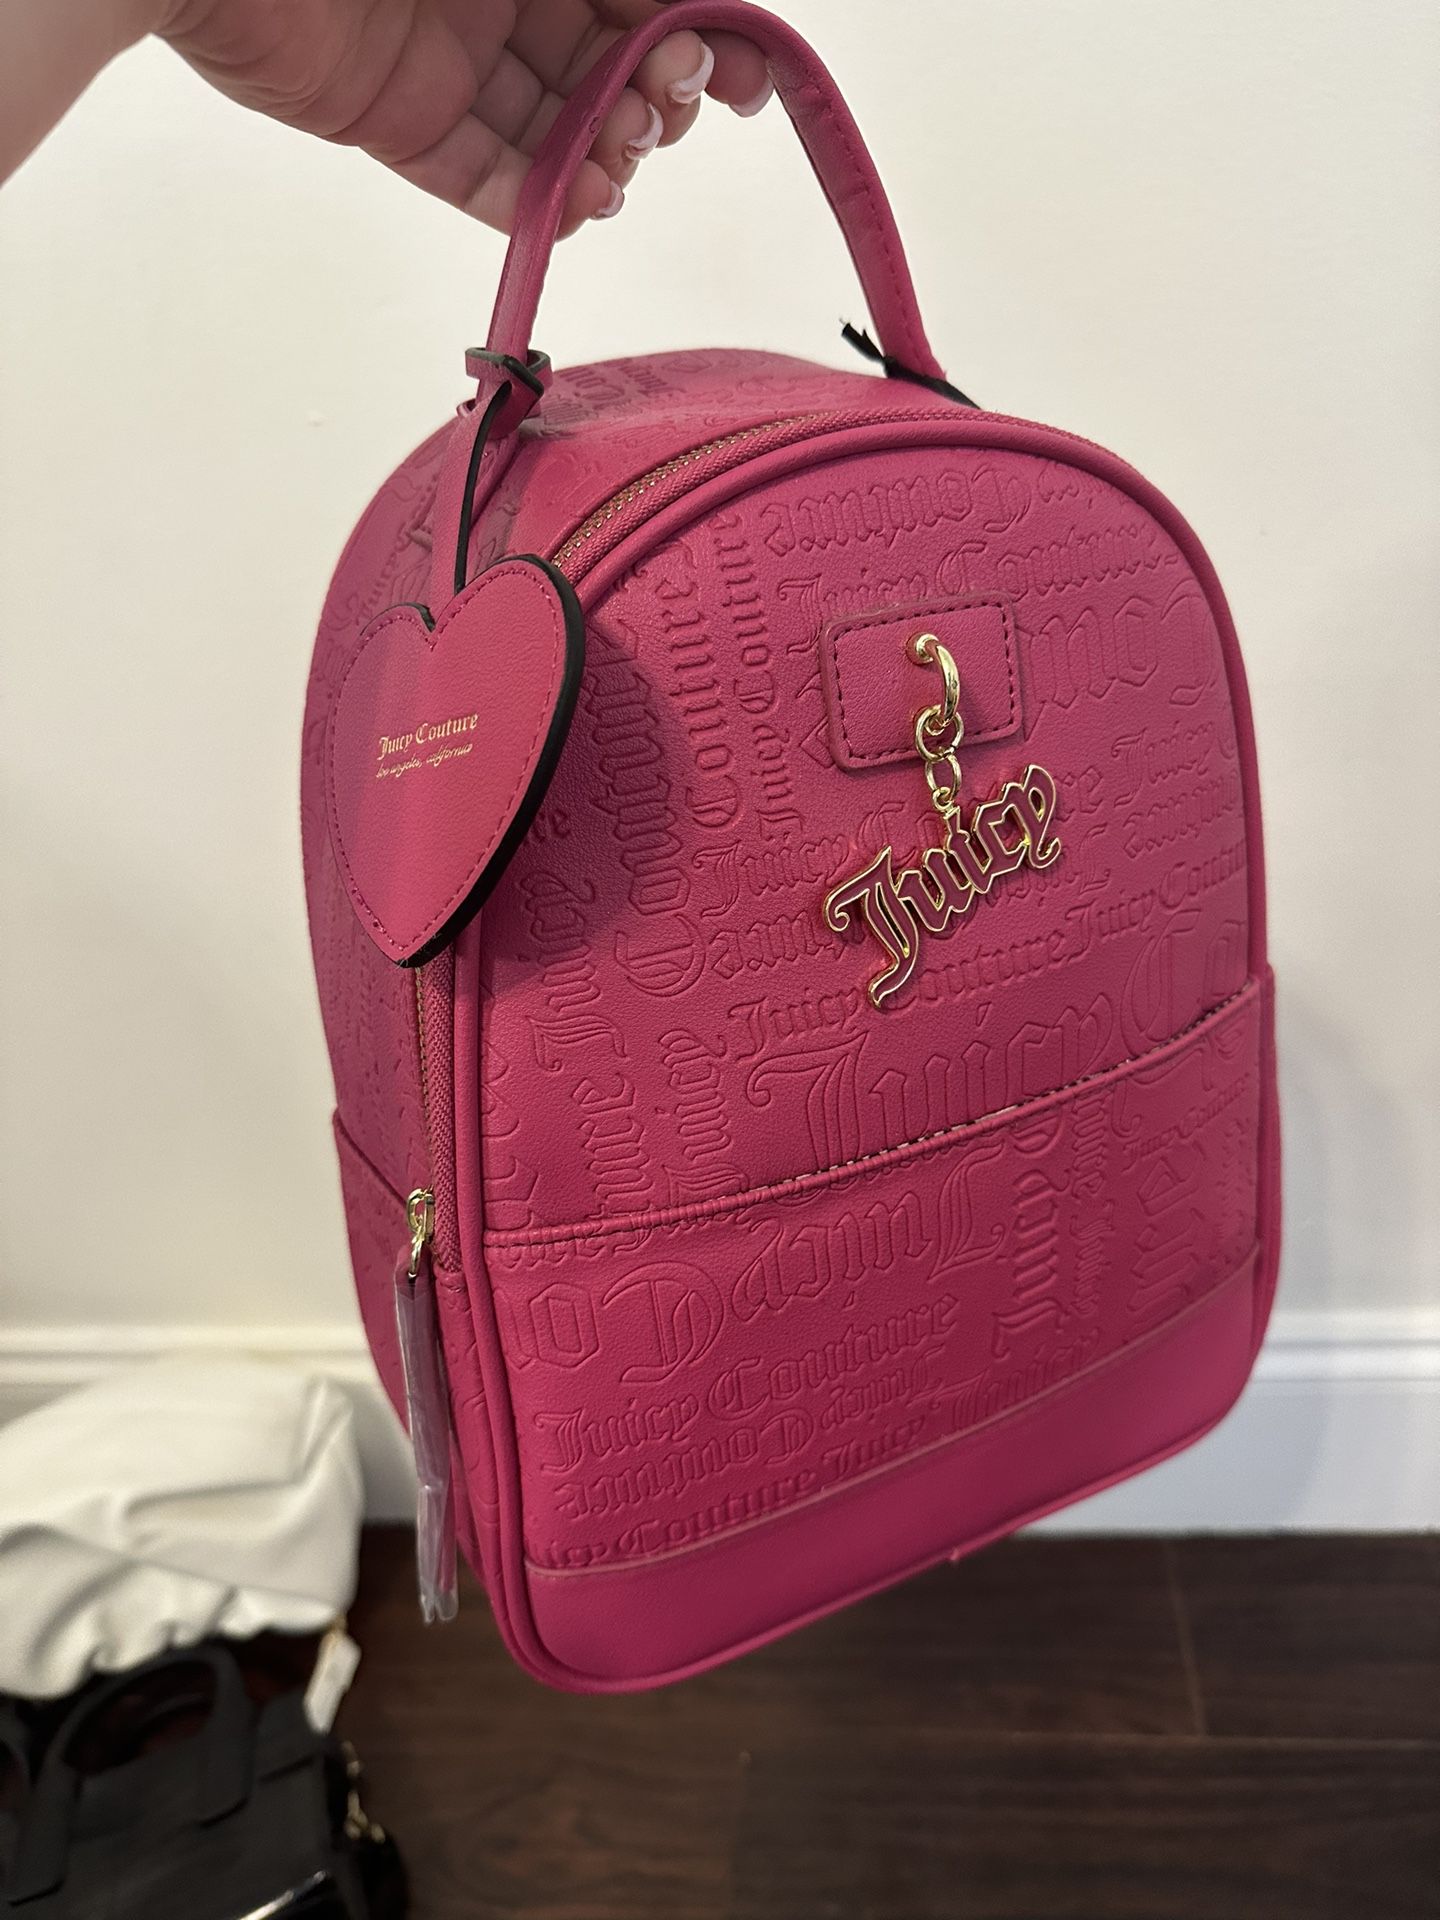 PINK JUICY COUTURE MINI BACKPACK